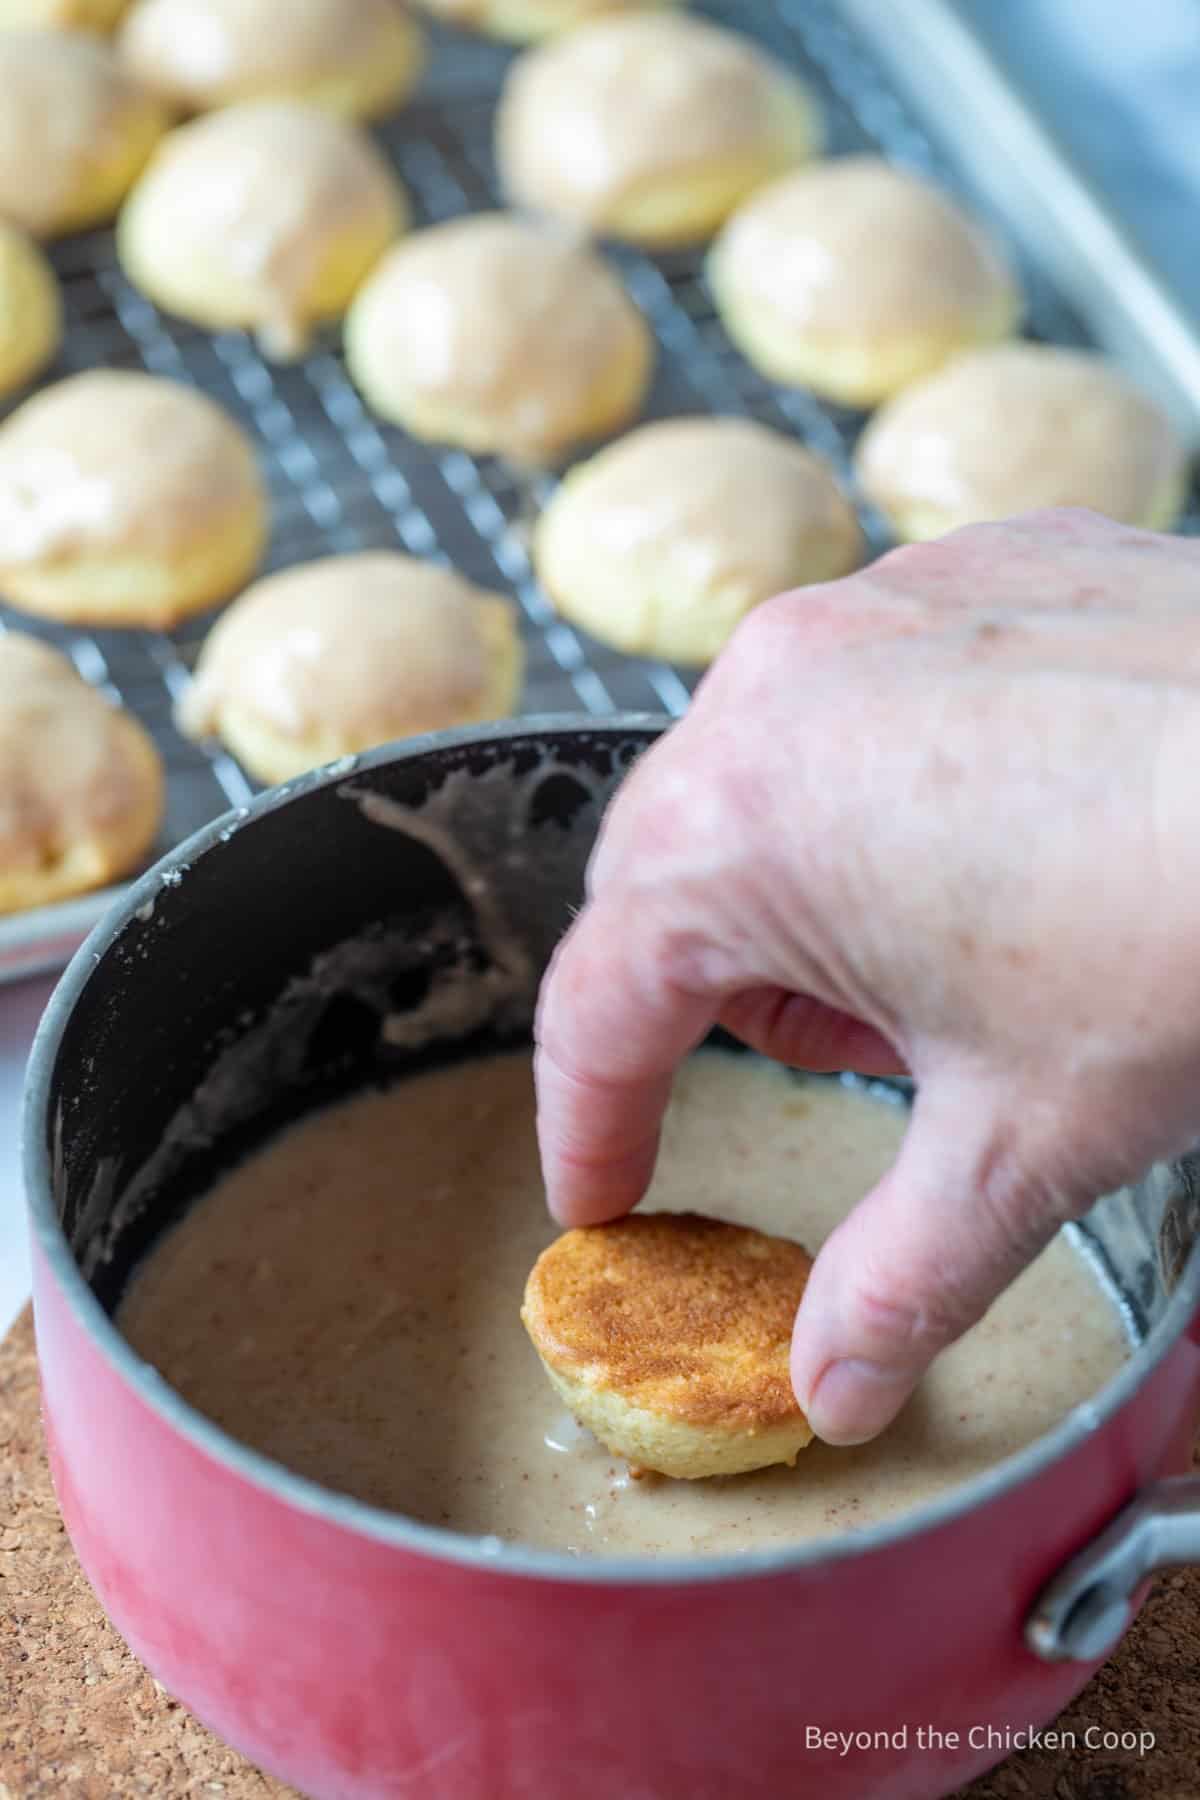 Dipping a cookie into a glaze.